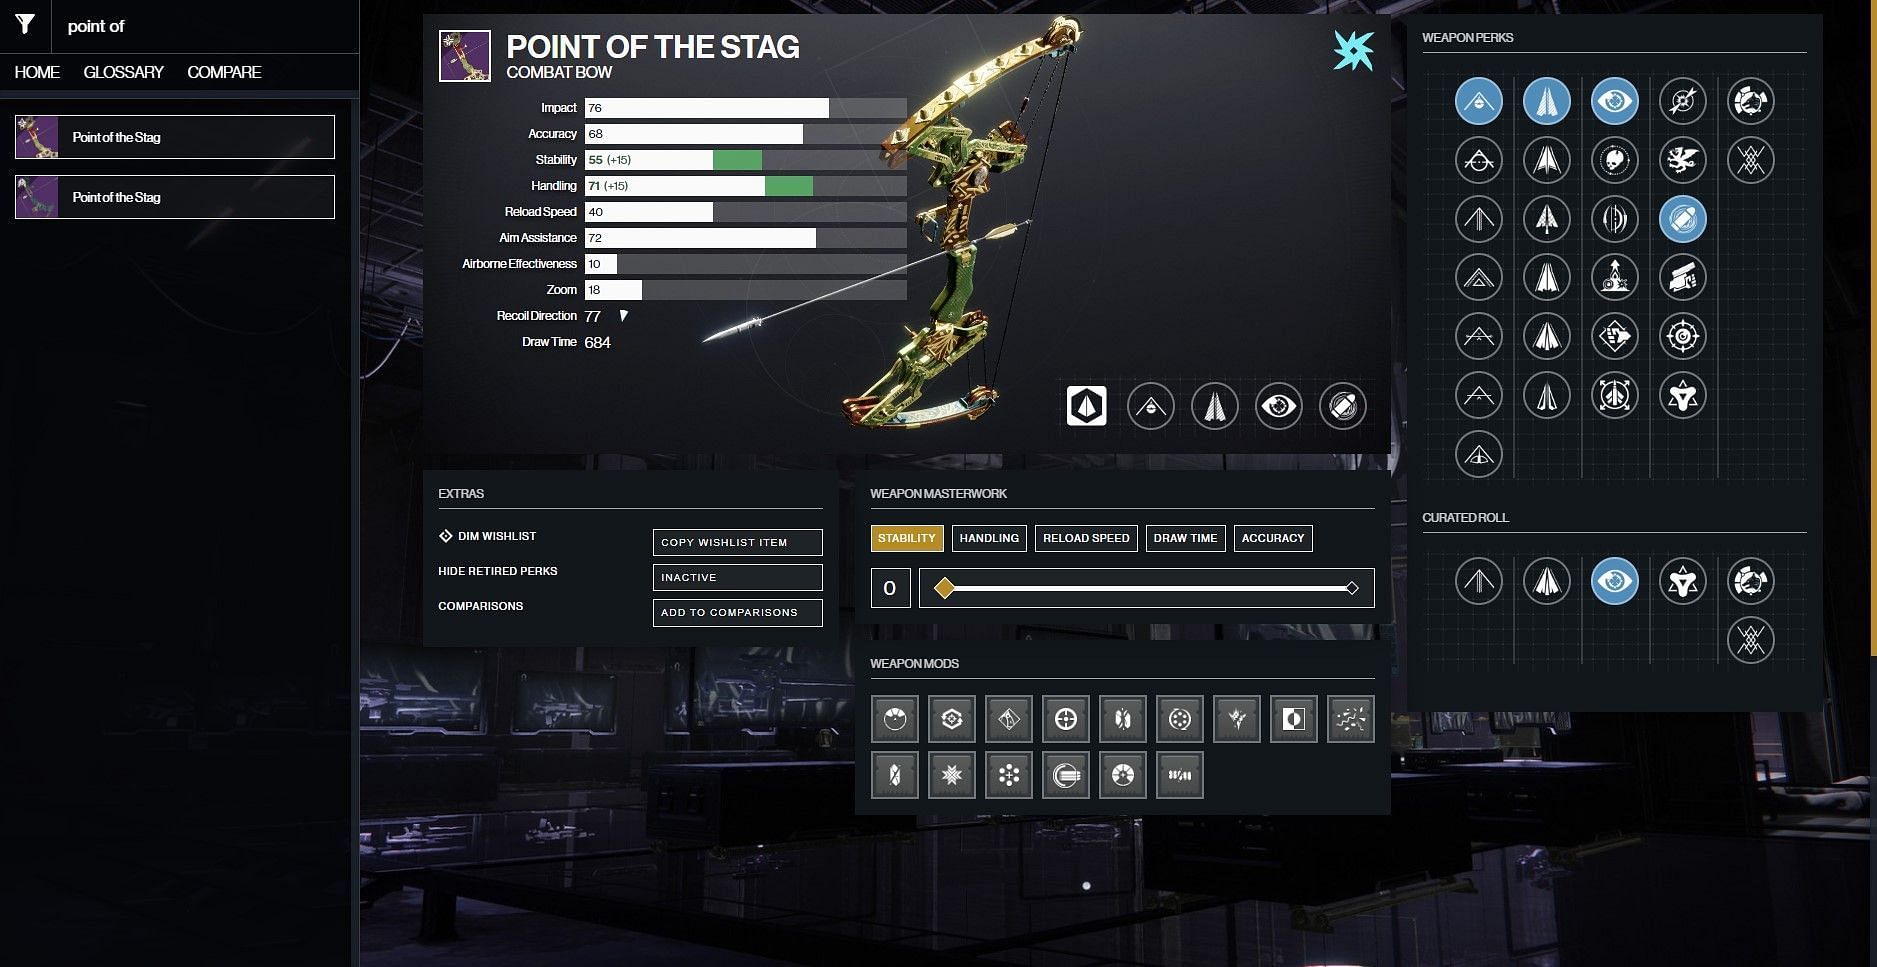 Point of the Stag god roll for PvP (Image via D2Gunsmith)